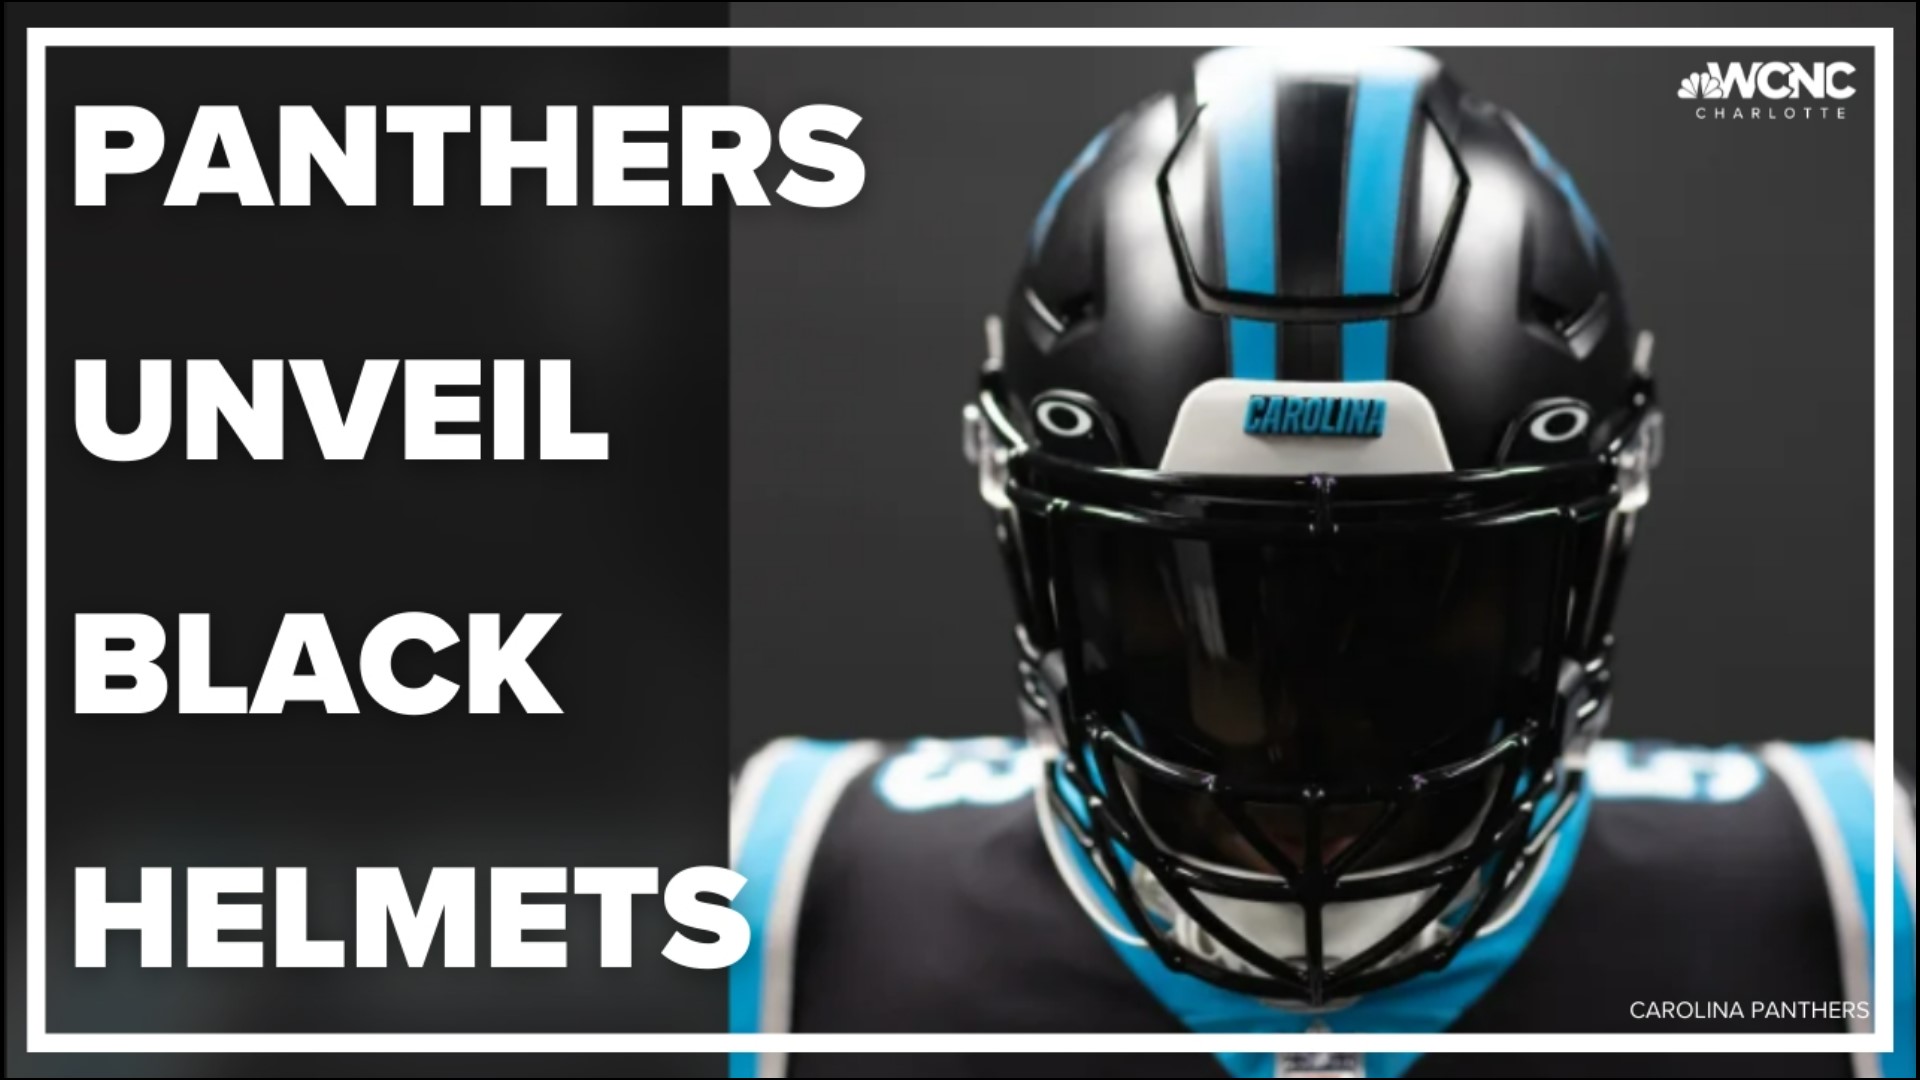 panthers all black uniforms